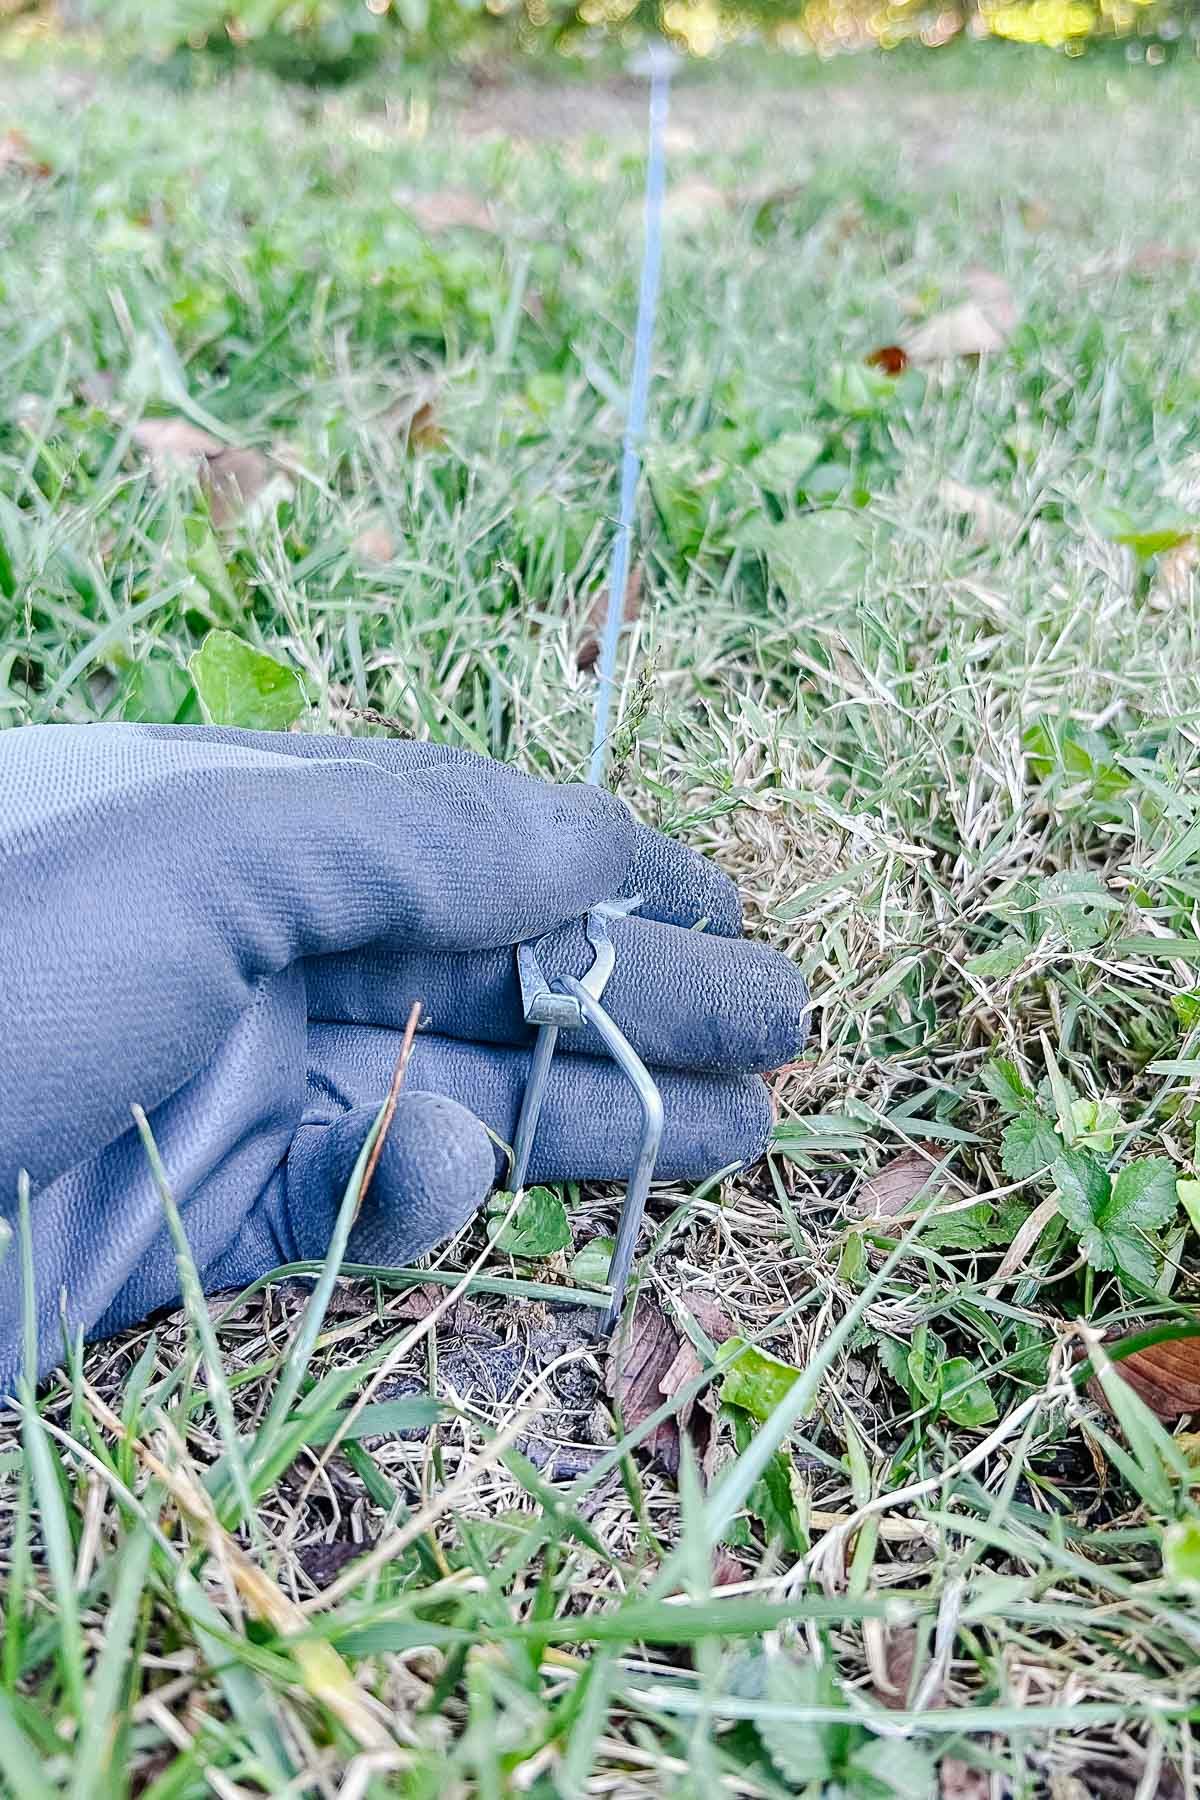 A gloved hand, holding a string to measure out a circle for a round fire pit patio